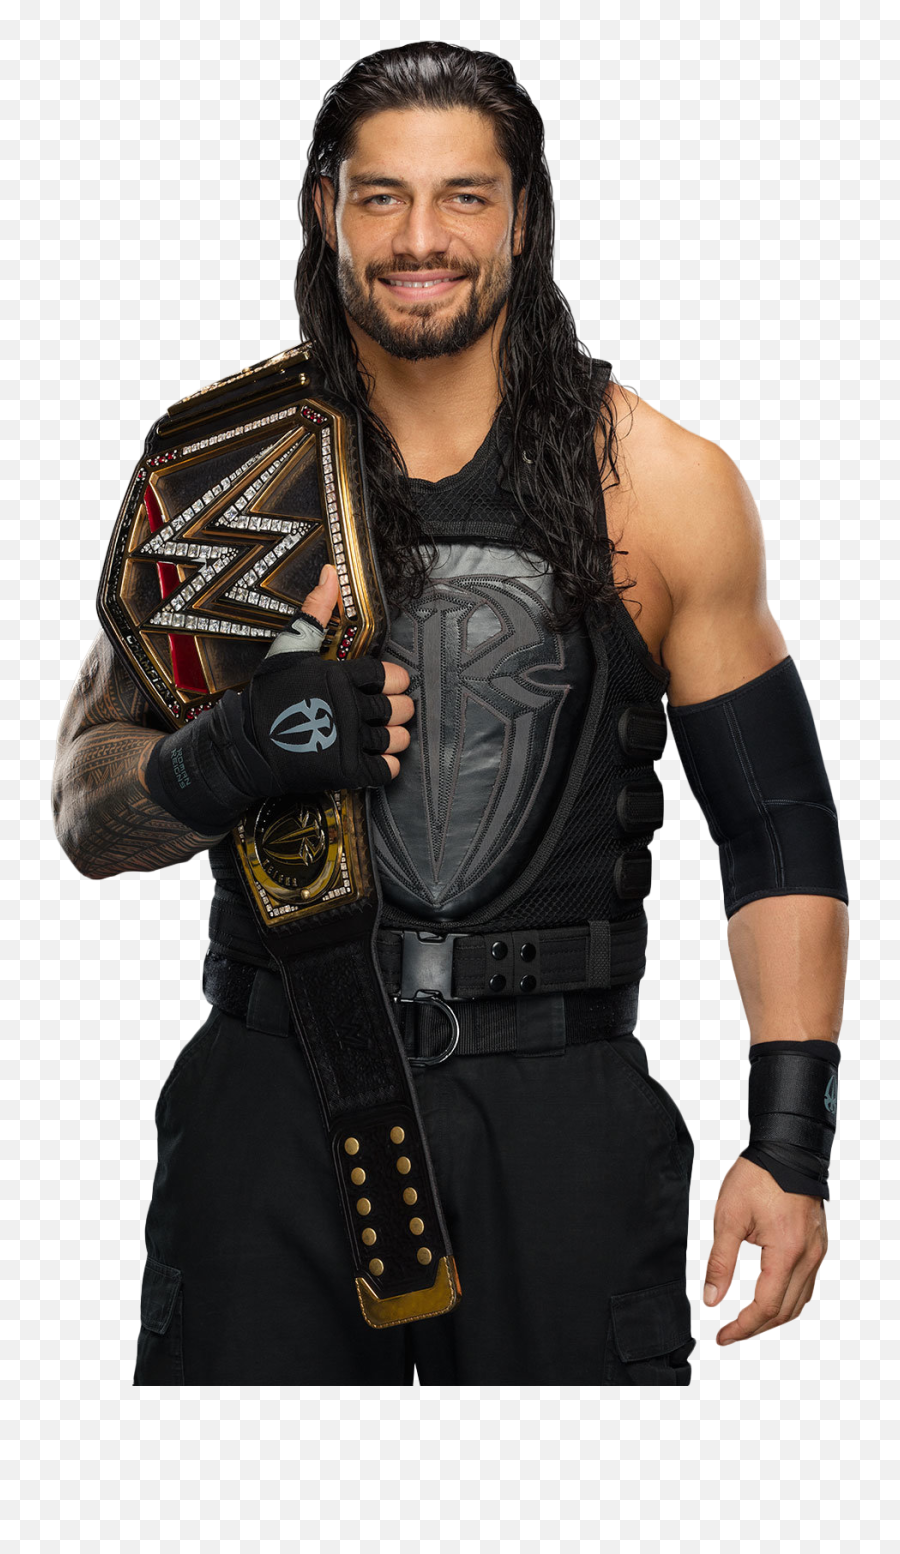 Png Hd Transparent Wwi - Roman Reigns With Wwe Championship,Roman Reigns Png